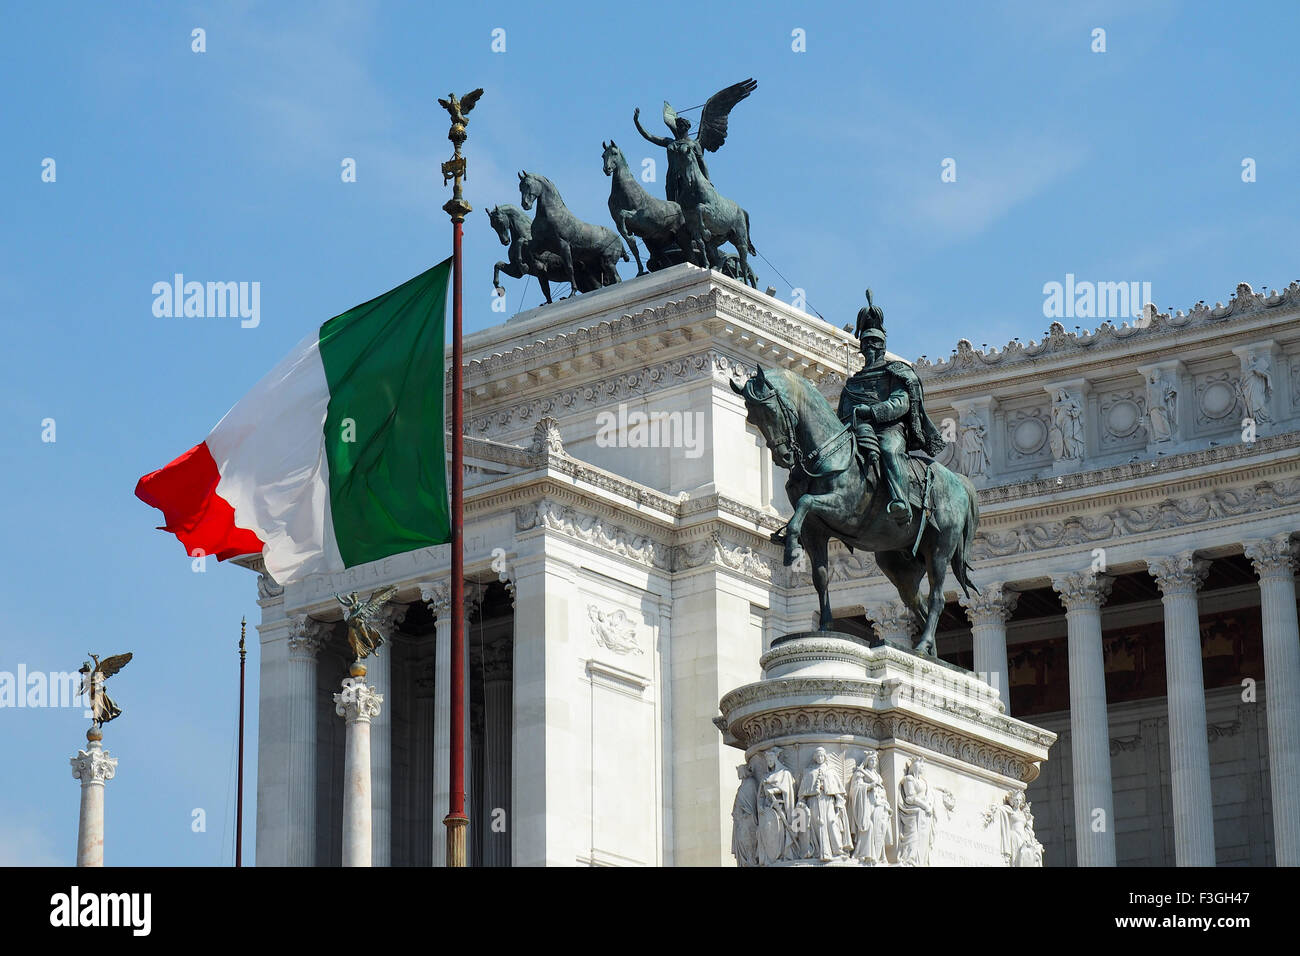 The Italian flag and bronze sculpture of King Emanuele in front of the National Monument to Victor Emmanuel II, Rome. Stock Photo